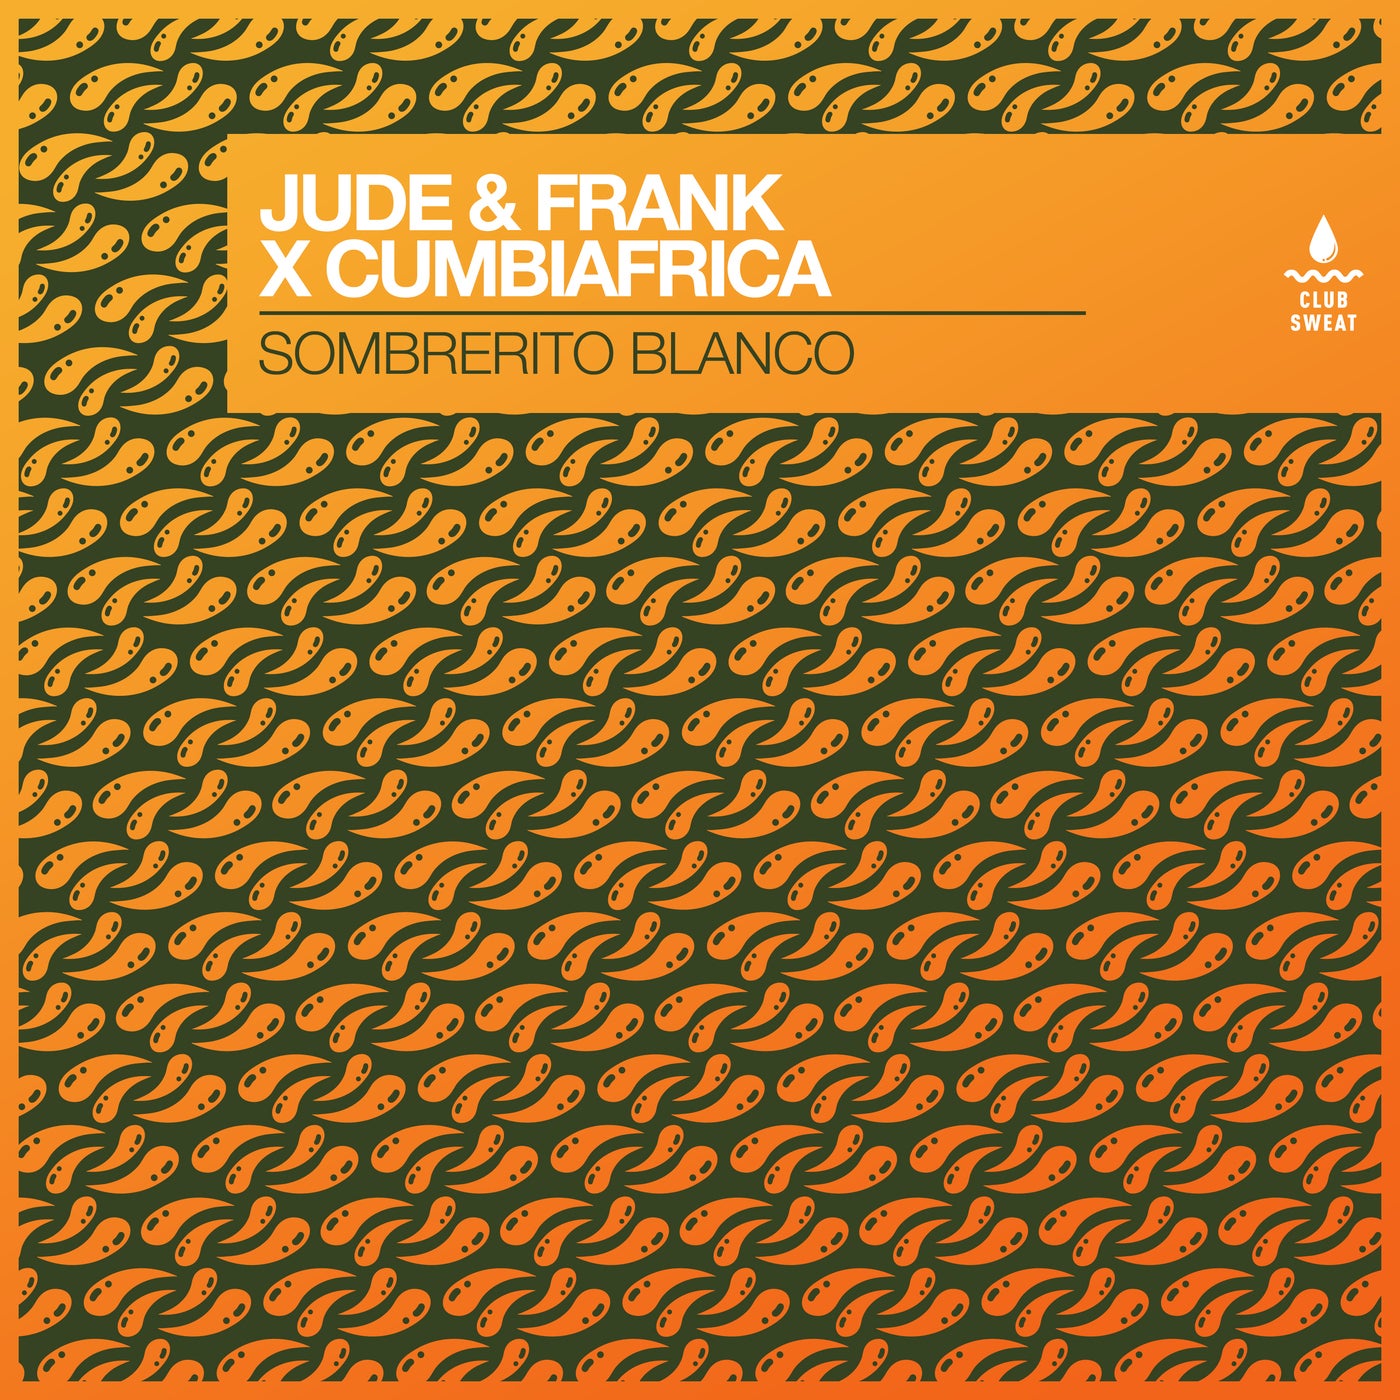 image cover: Jude & Frank, Cumbiafrica - Sombrerito Blanco (Extended Mix) on Club Sweat